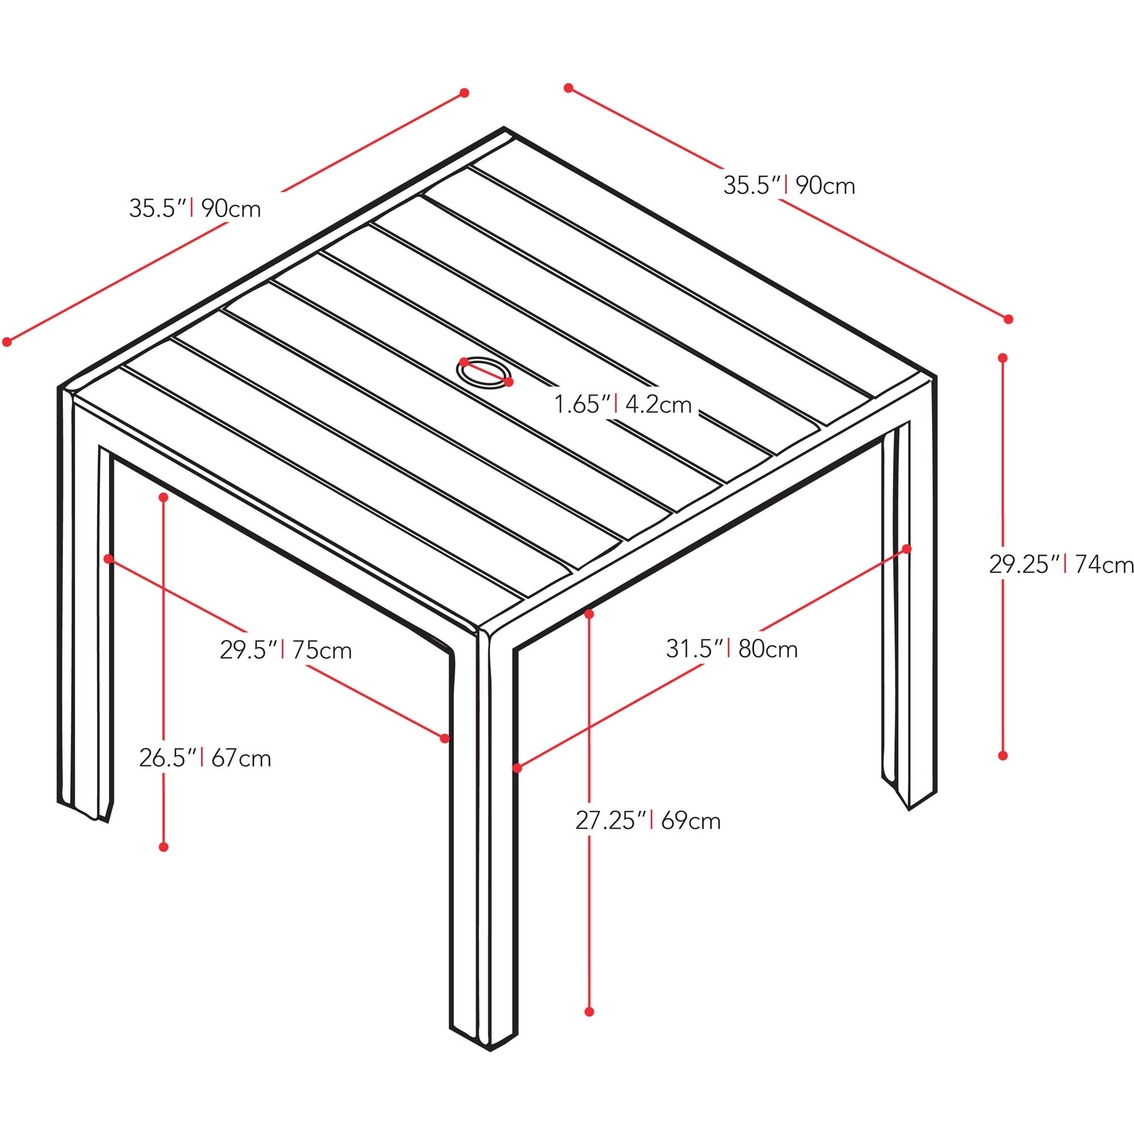 CorLiving Gallant Square Outdoor Dining Table - Image 6 of 6